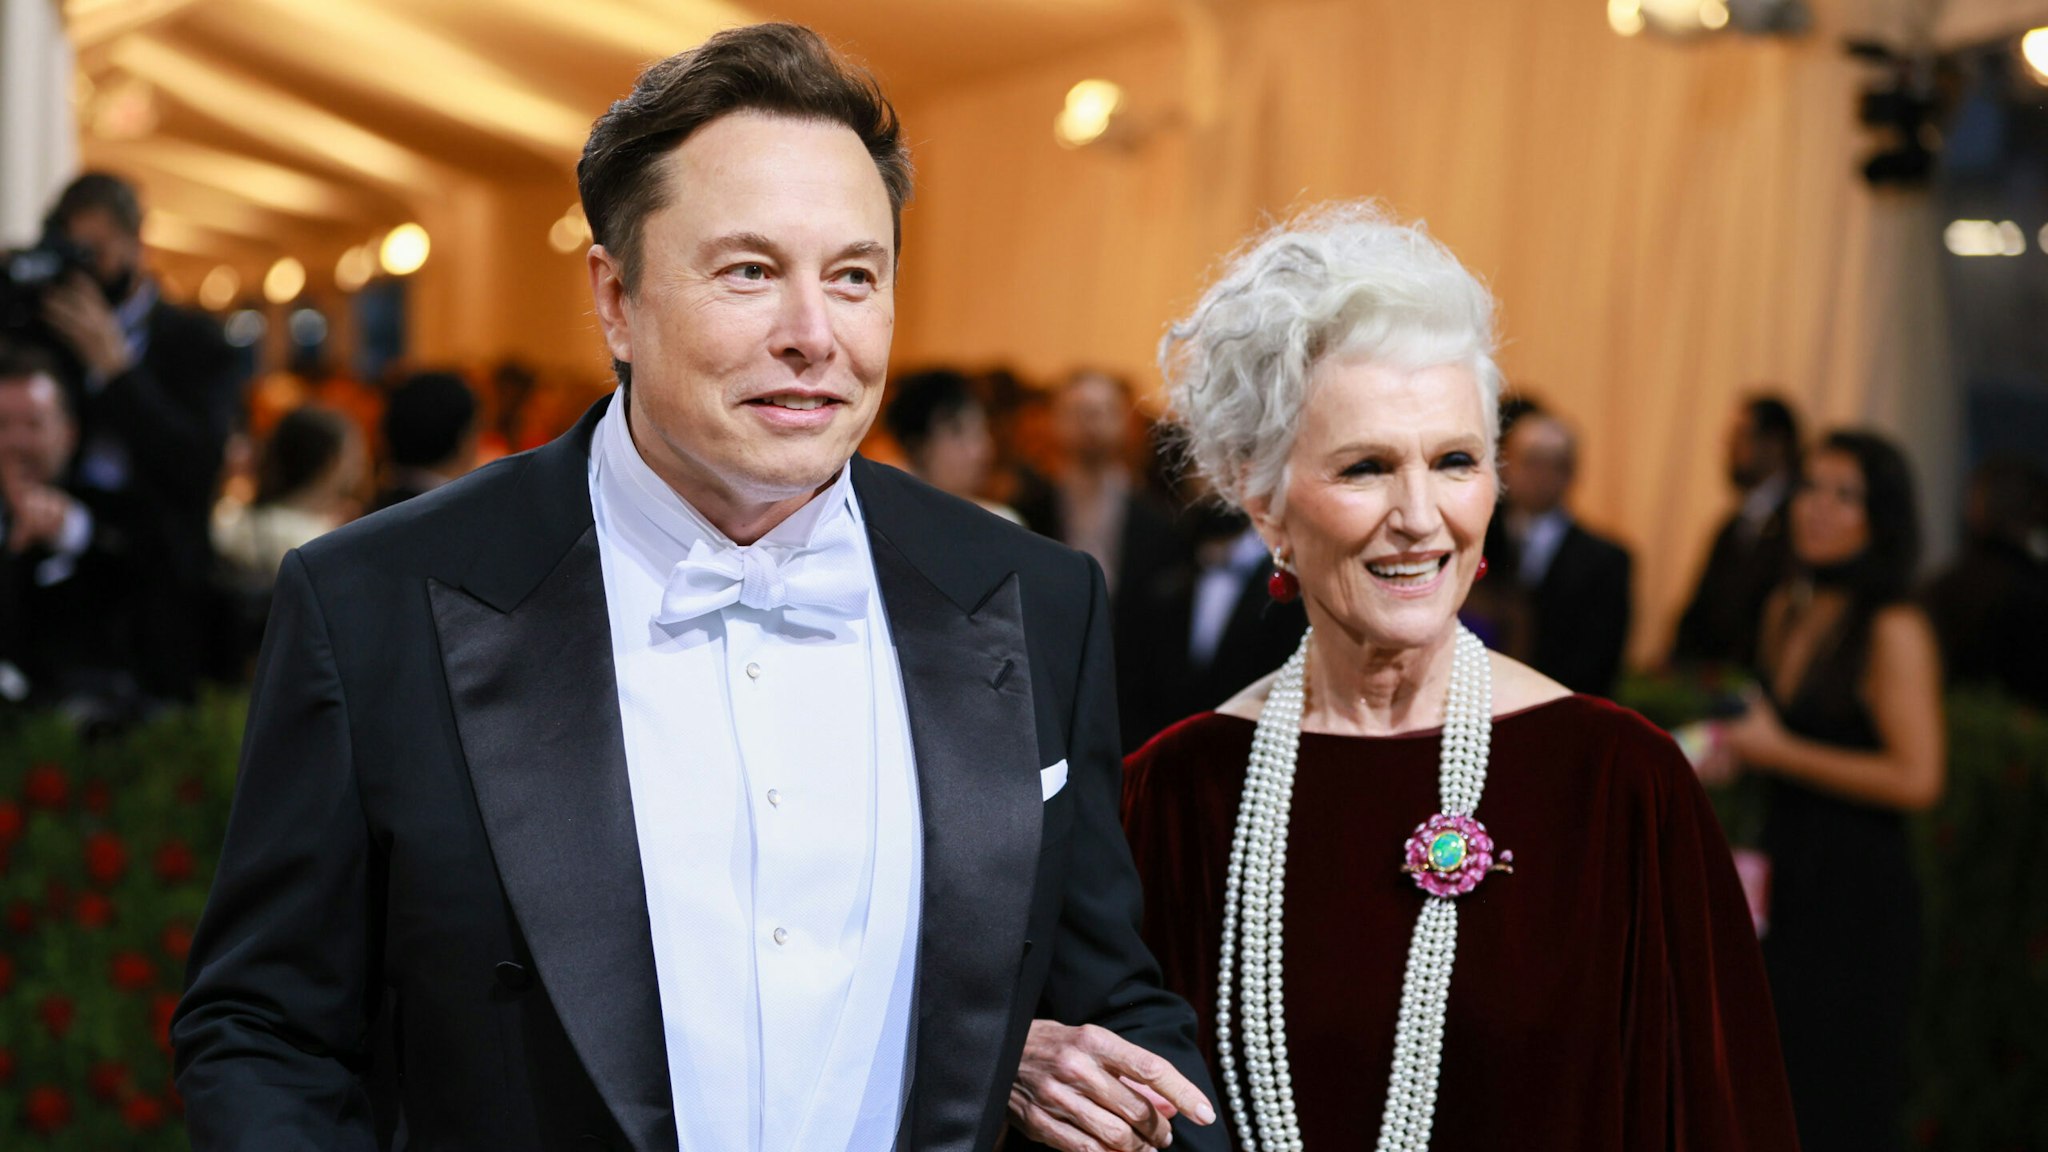 NEW YORK, NEW YORK - MAY 02: Elon Musk and Maye Musk attend The 2022 Met Gala Celebrating "In America: An Anthology of Fashion" at The Metropolitan Museum of Art on May 02, 2022 in New York City.